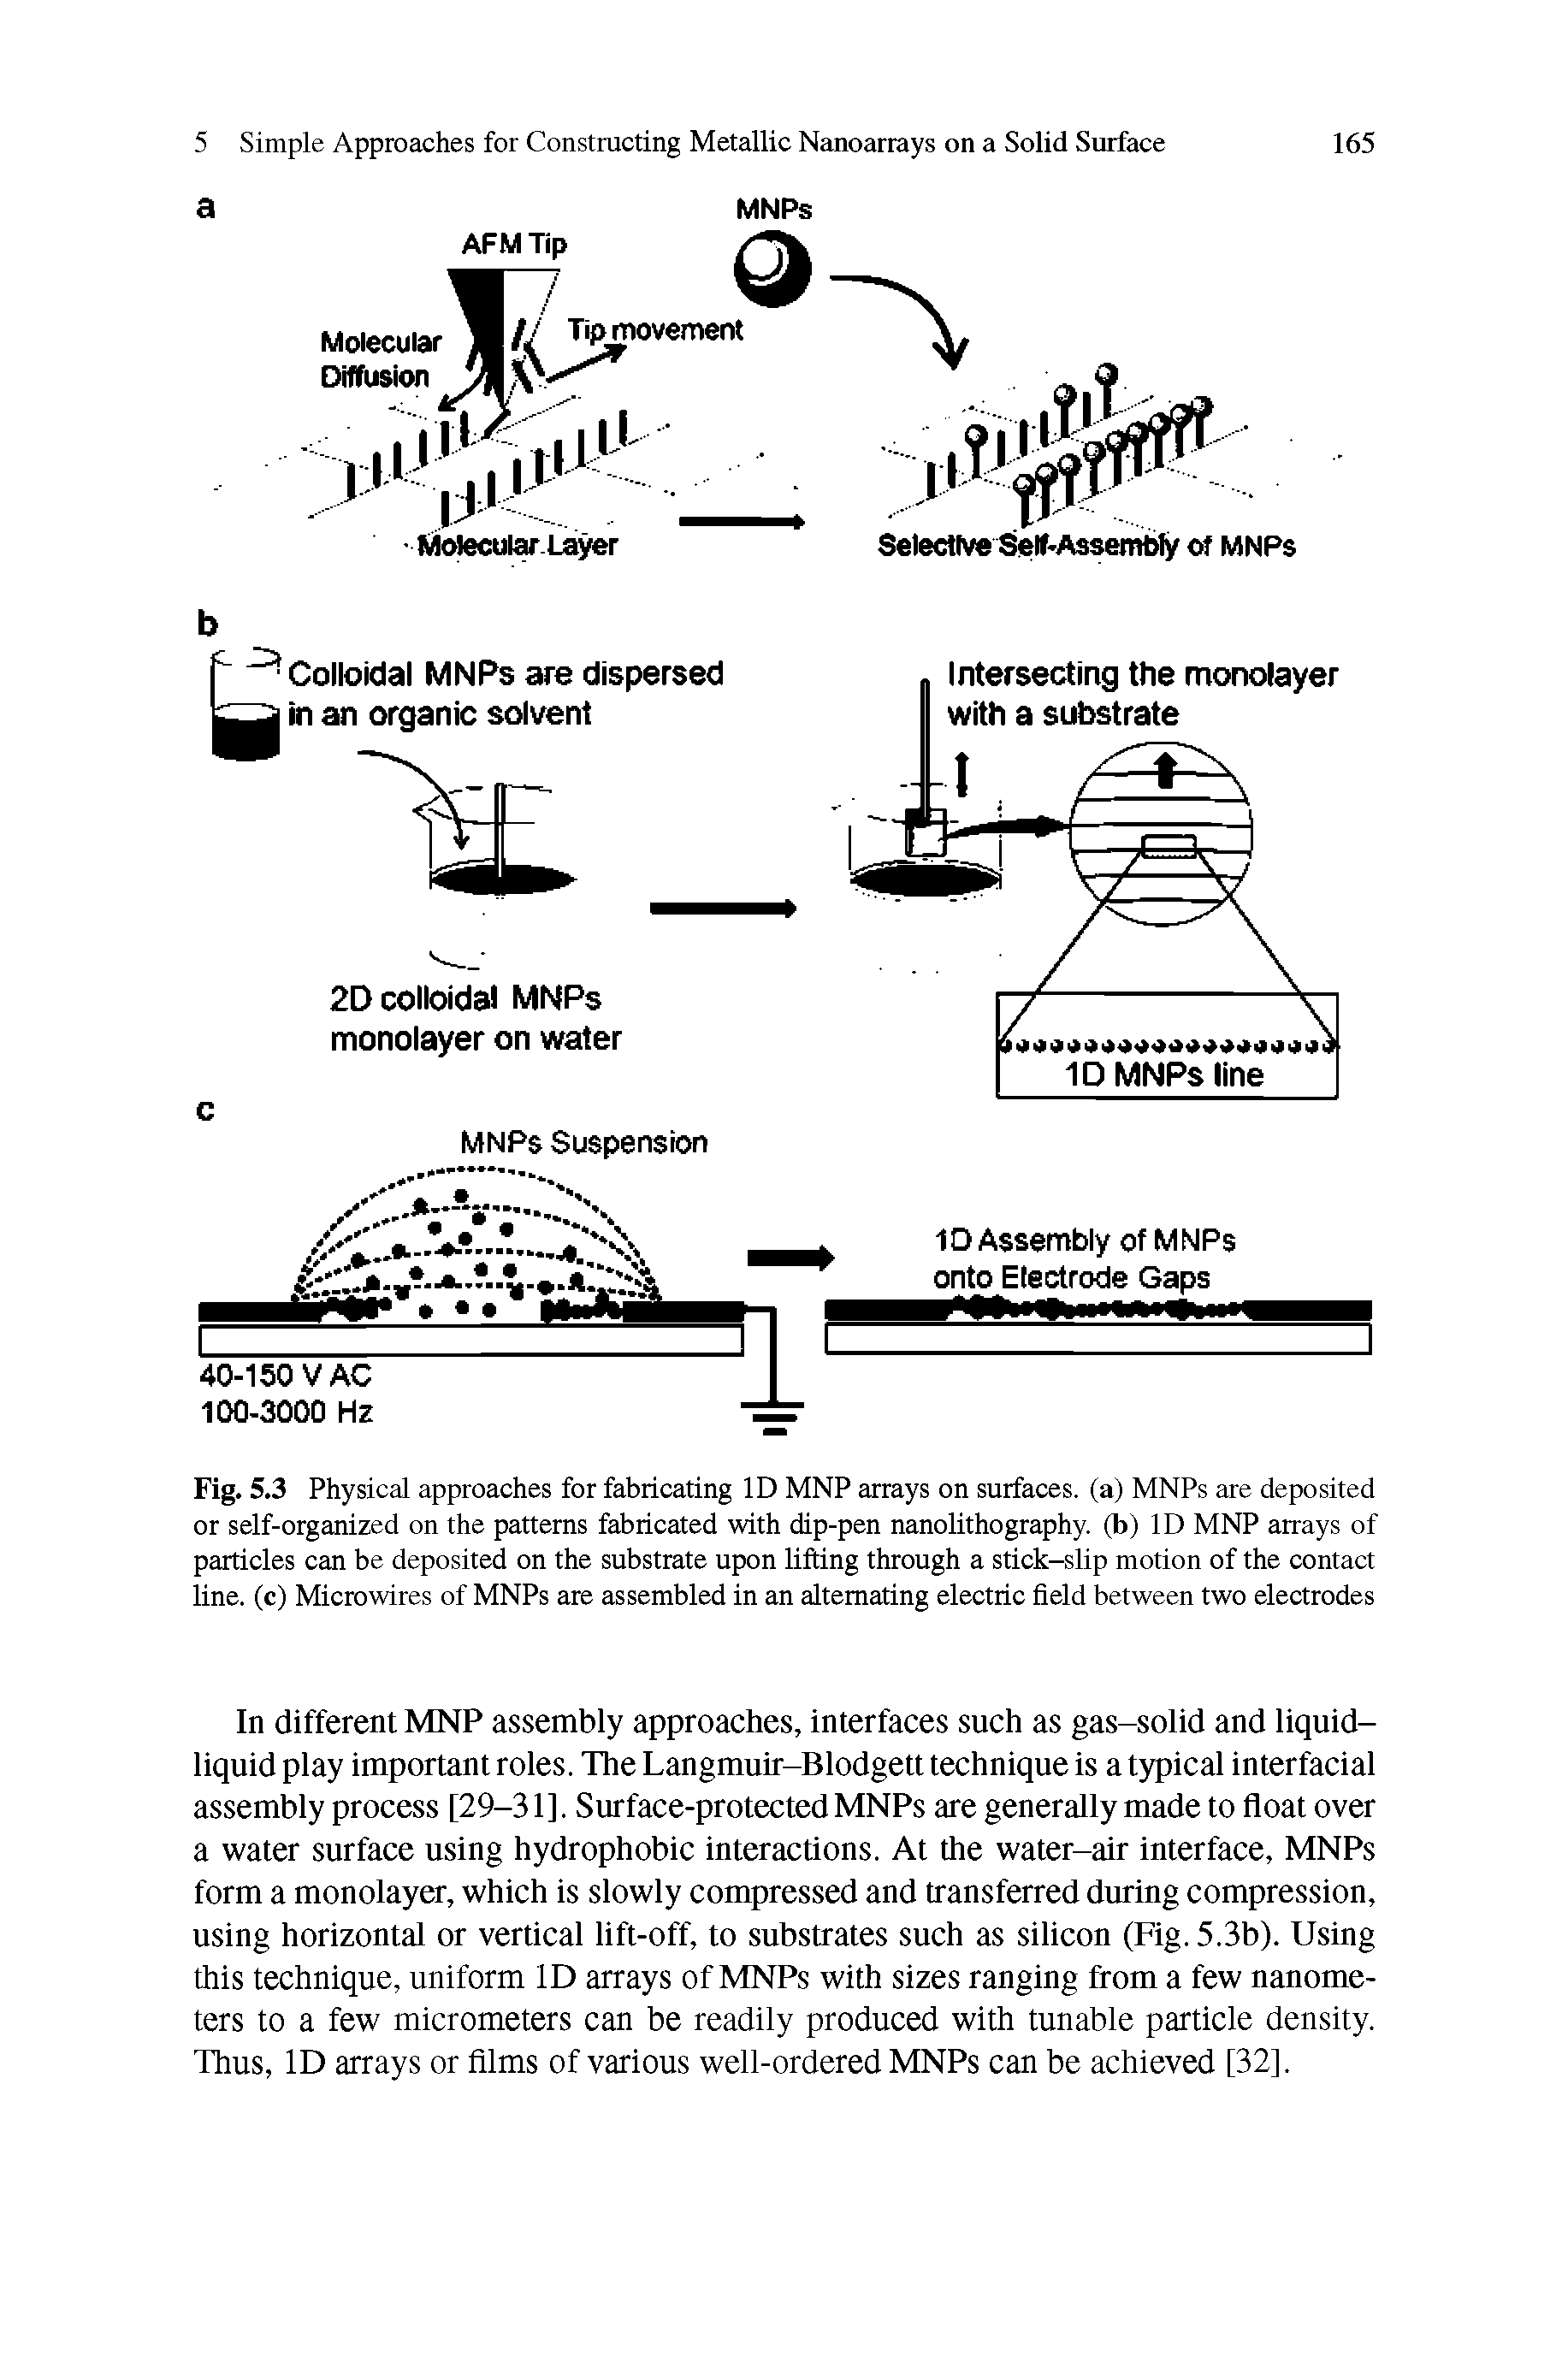 Fig. 5.3 Physical approaches for fabricating ID MNP arrays on surfaces, (a) MNPs are deposited or self-organized on the patterns fabricated with dip-pen nanoUthography. (b) ID MNP arrays of particles can be deposited on the substrate upon lifting through a stick-slip motion of the contact line, (c) Microwires of MNPs are assembled in an alternating electric field between two electrodes...